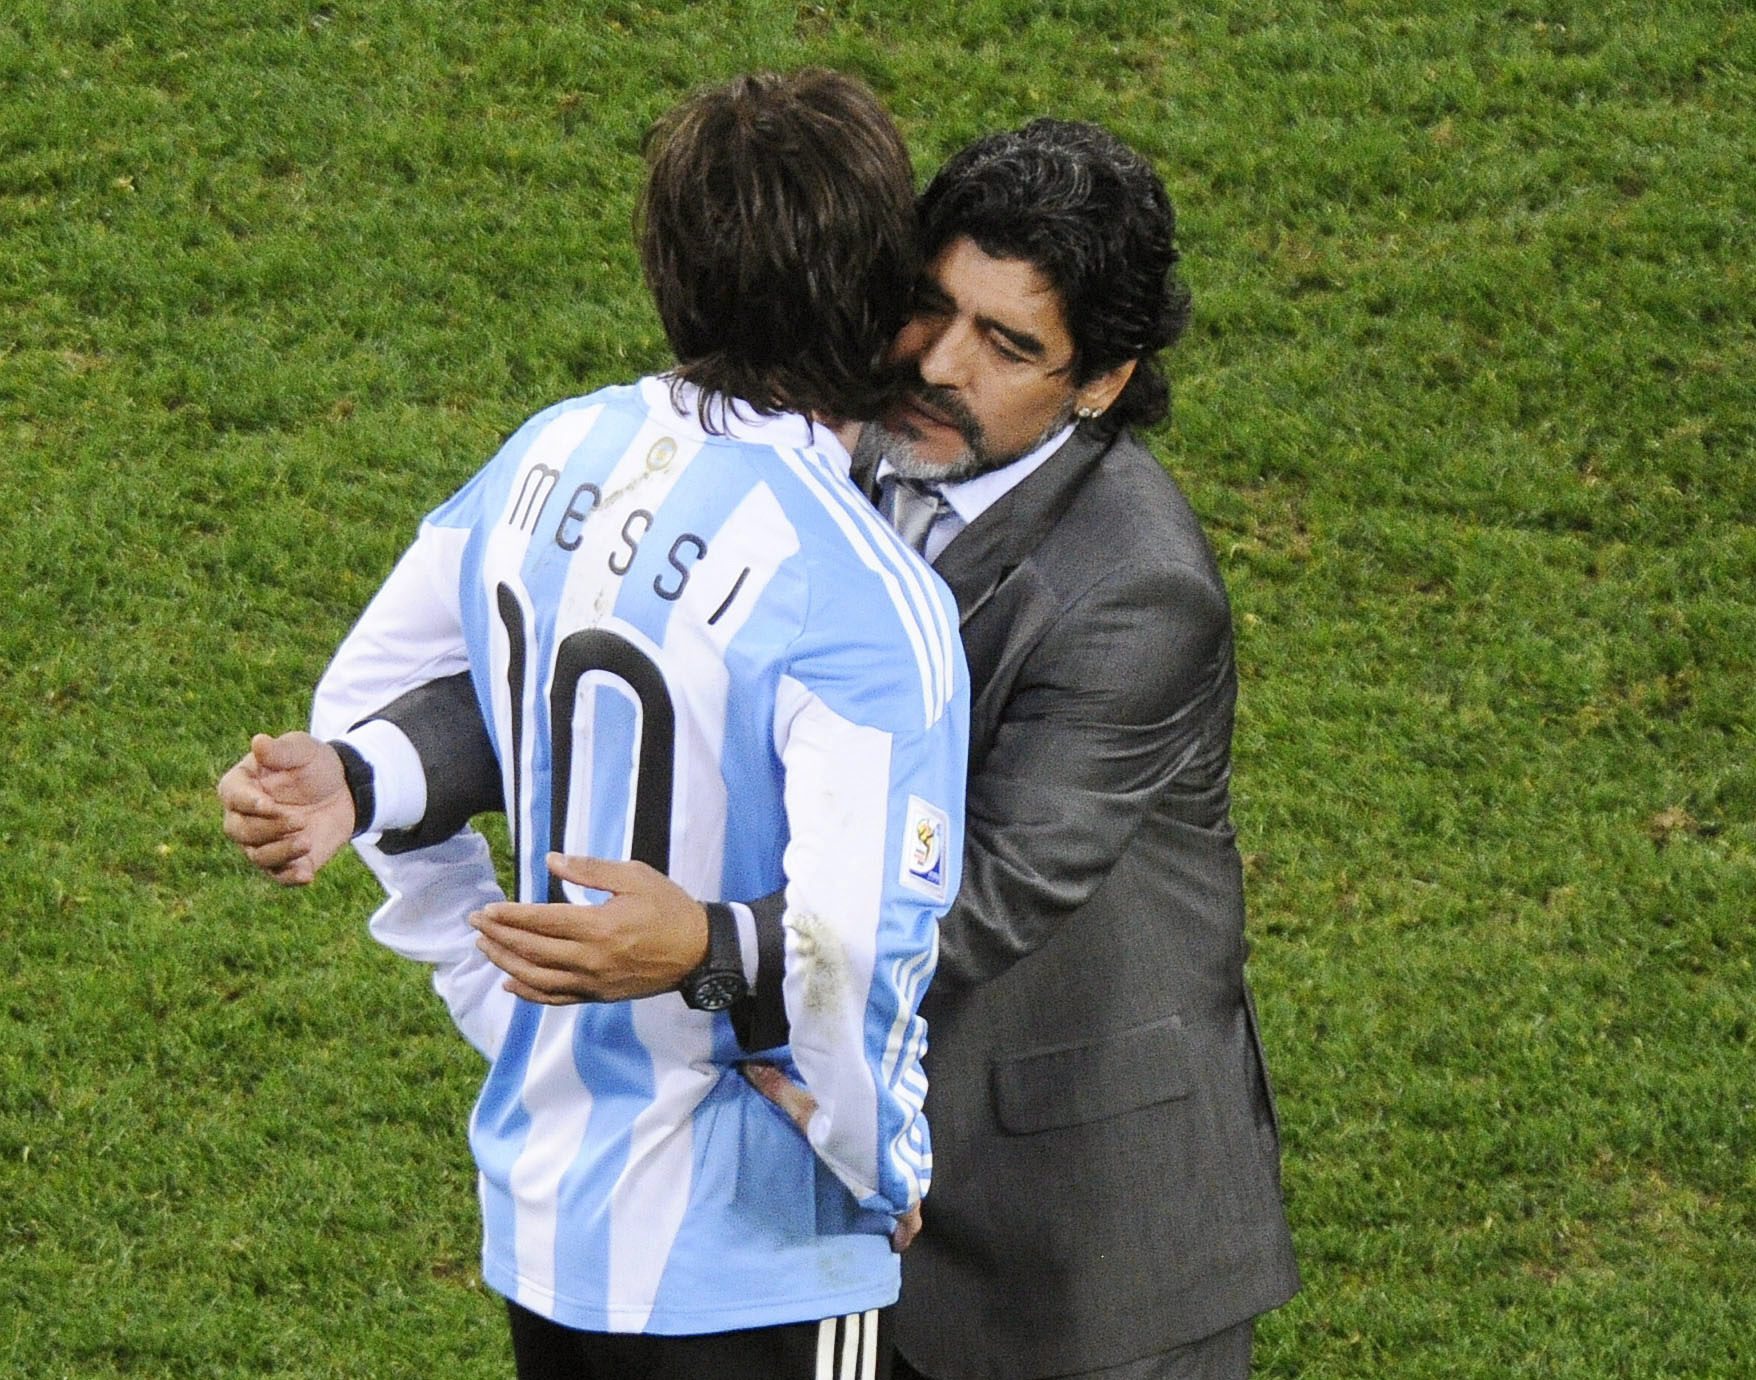 epa02235407 Argentinian national soccer team head coach Diego Maradona (R) hugs his forward Lionel Messi (L) after the FIFA World Cup 2010 quarter final soccer match between Argentina and Germany at the Green Point stadium in Cape Town, South Africa, 03 July 2010. Germany won 4-0 and advanced to the semi final.  EPA/HELMUT FOHRINGER Please refer to www.epa.eu/downloads/FIFA-WorldCup2010-Terms-and-Conditions.pdf